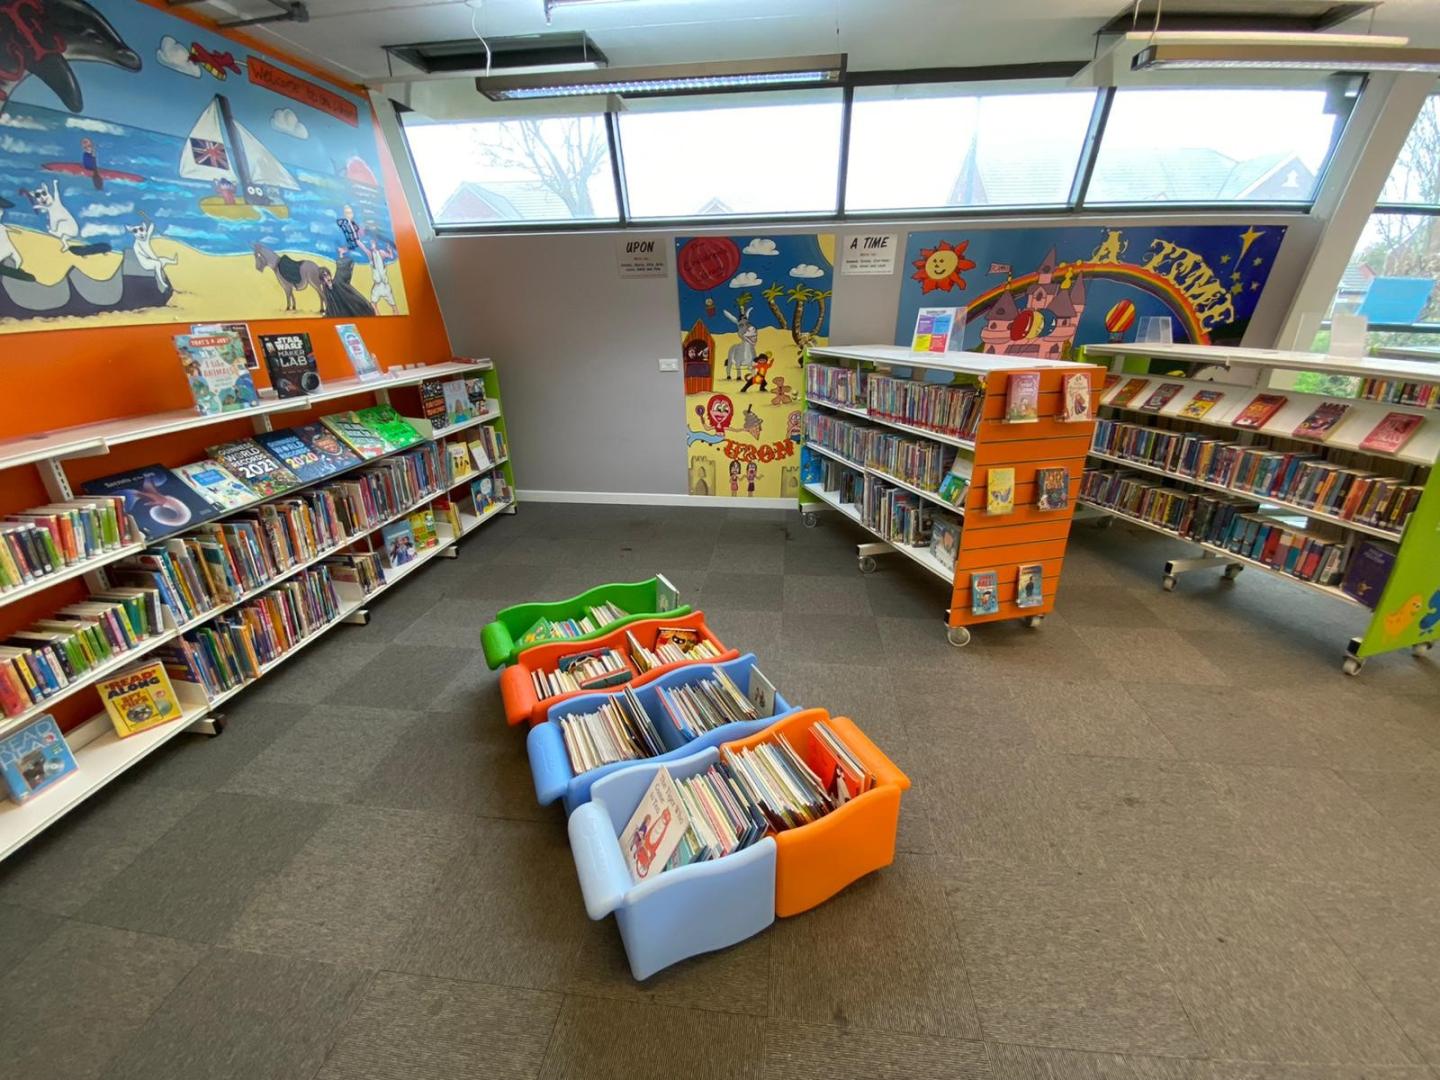 A side view of the children's area at a library, with orange and green shelves and book bins